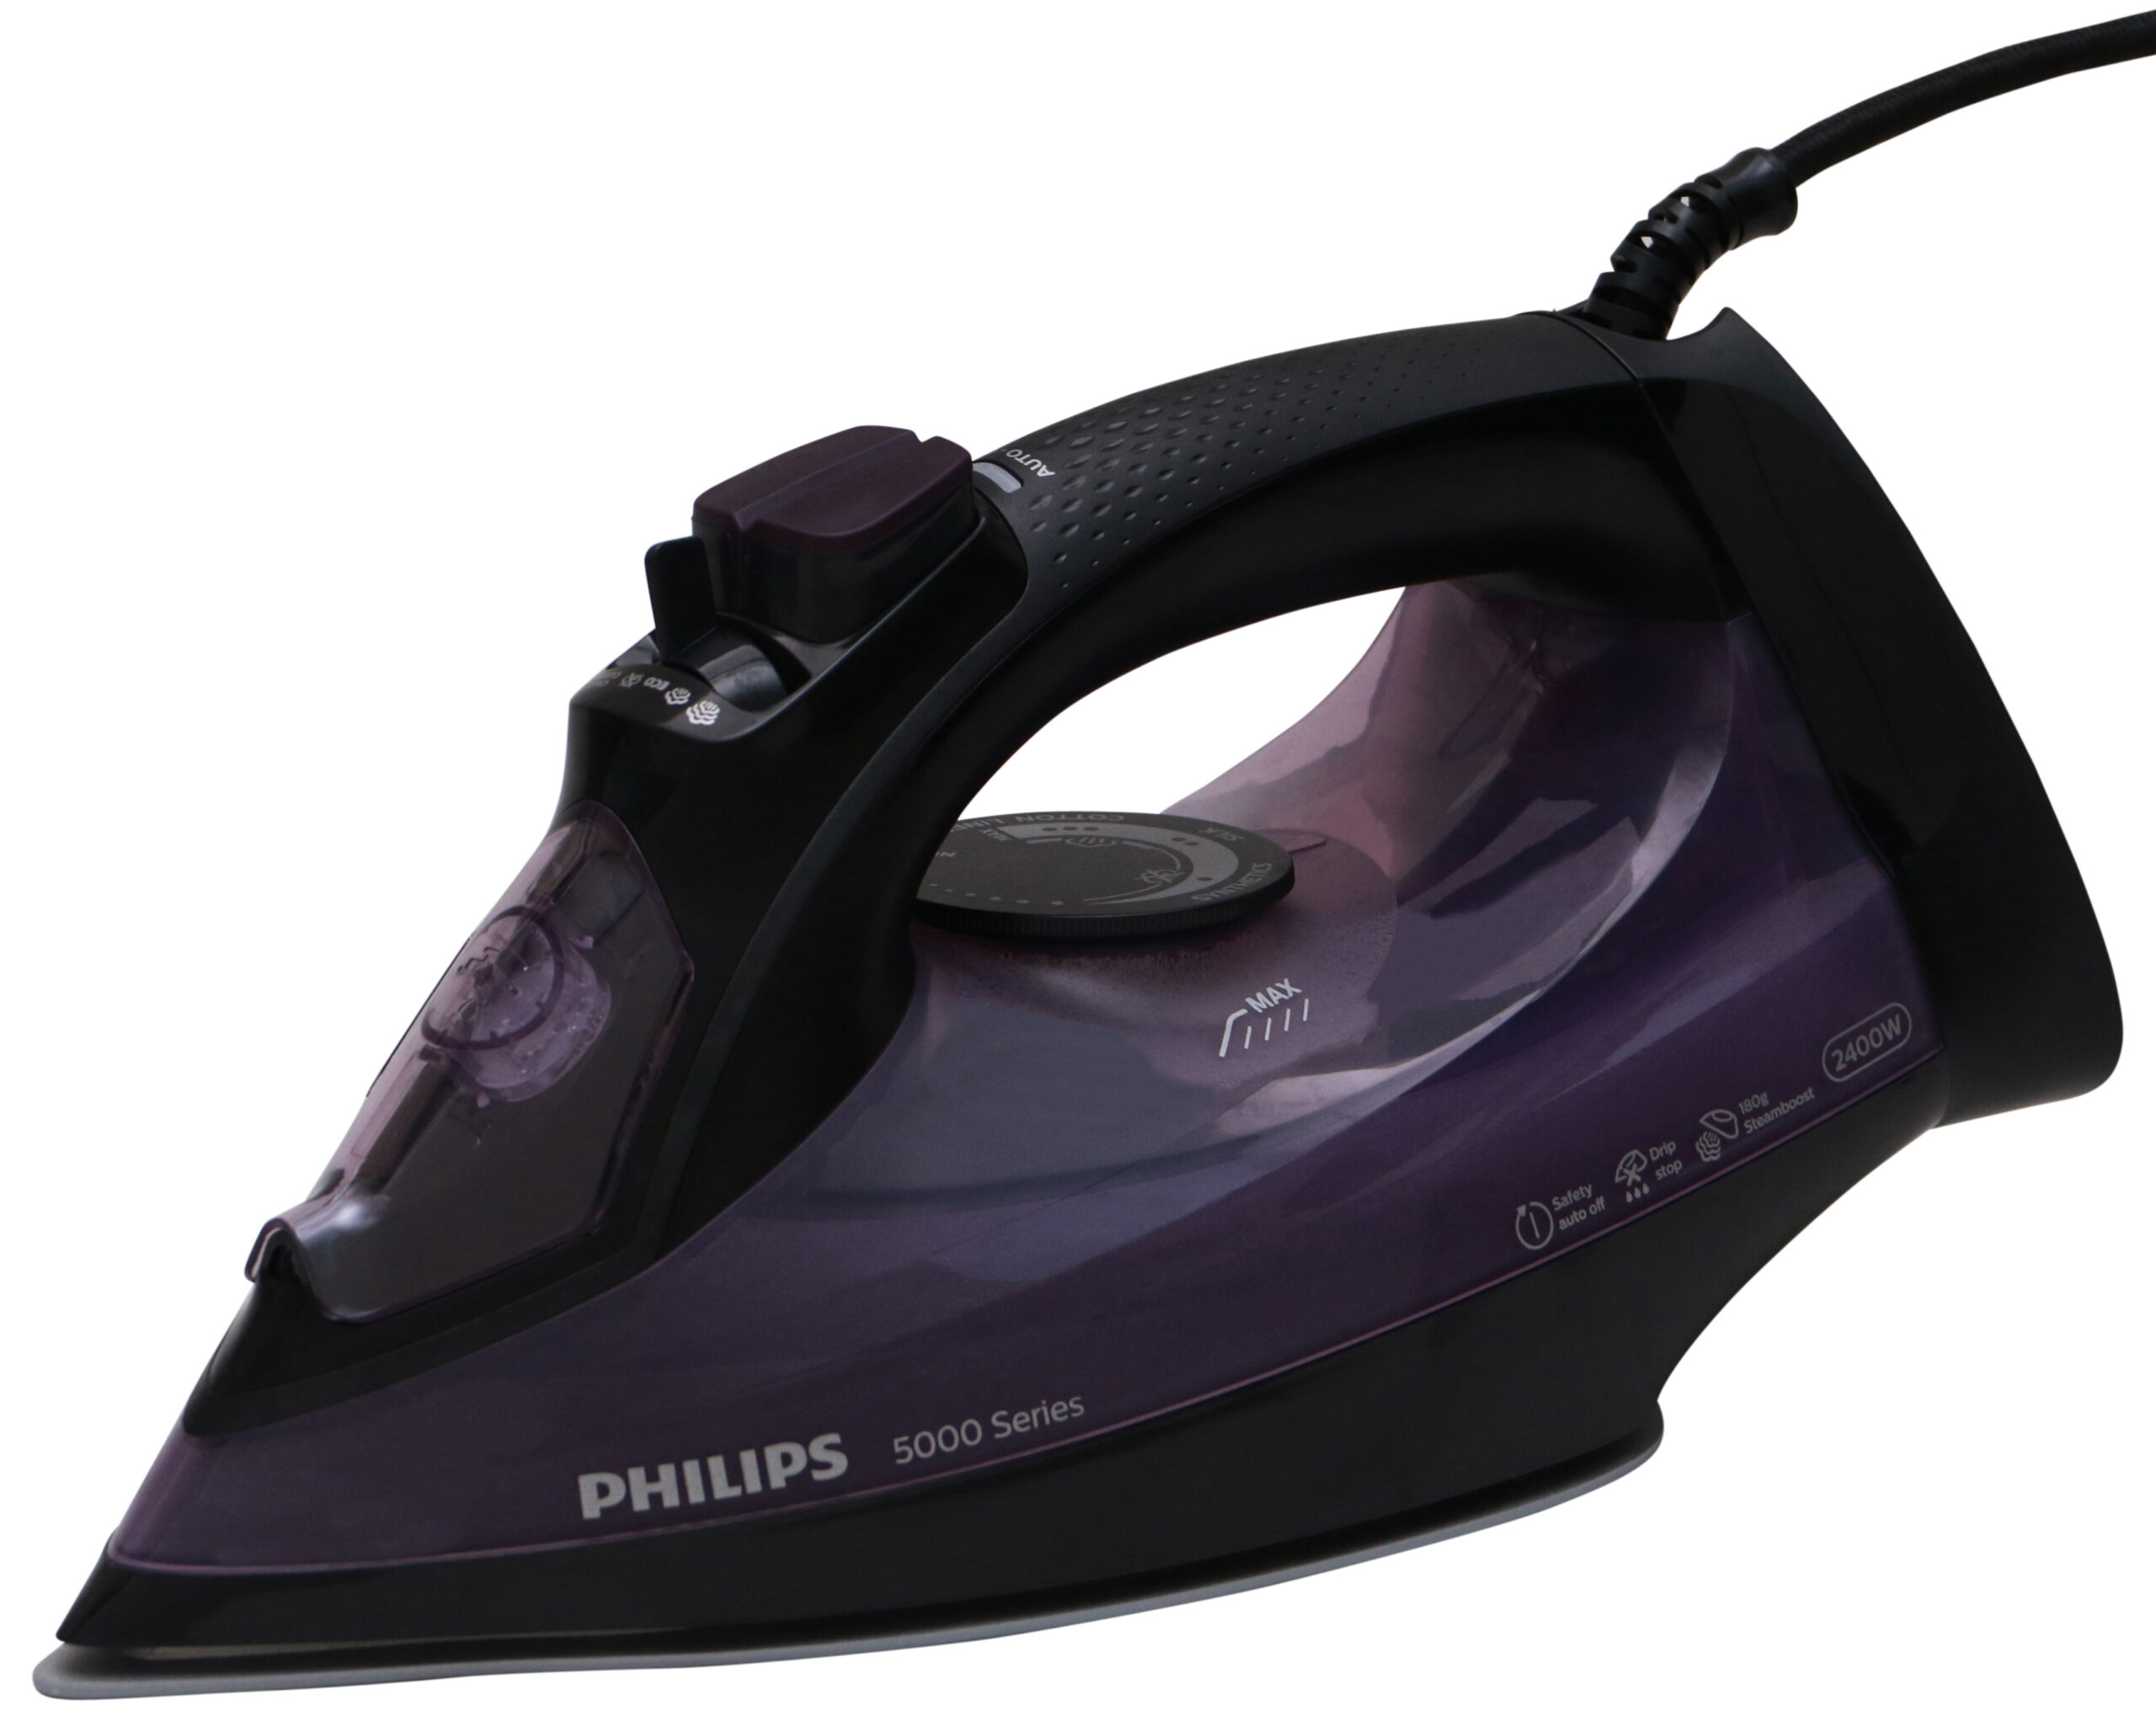 Philips DST5030/80 5000 Series